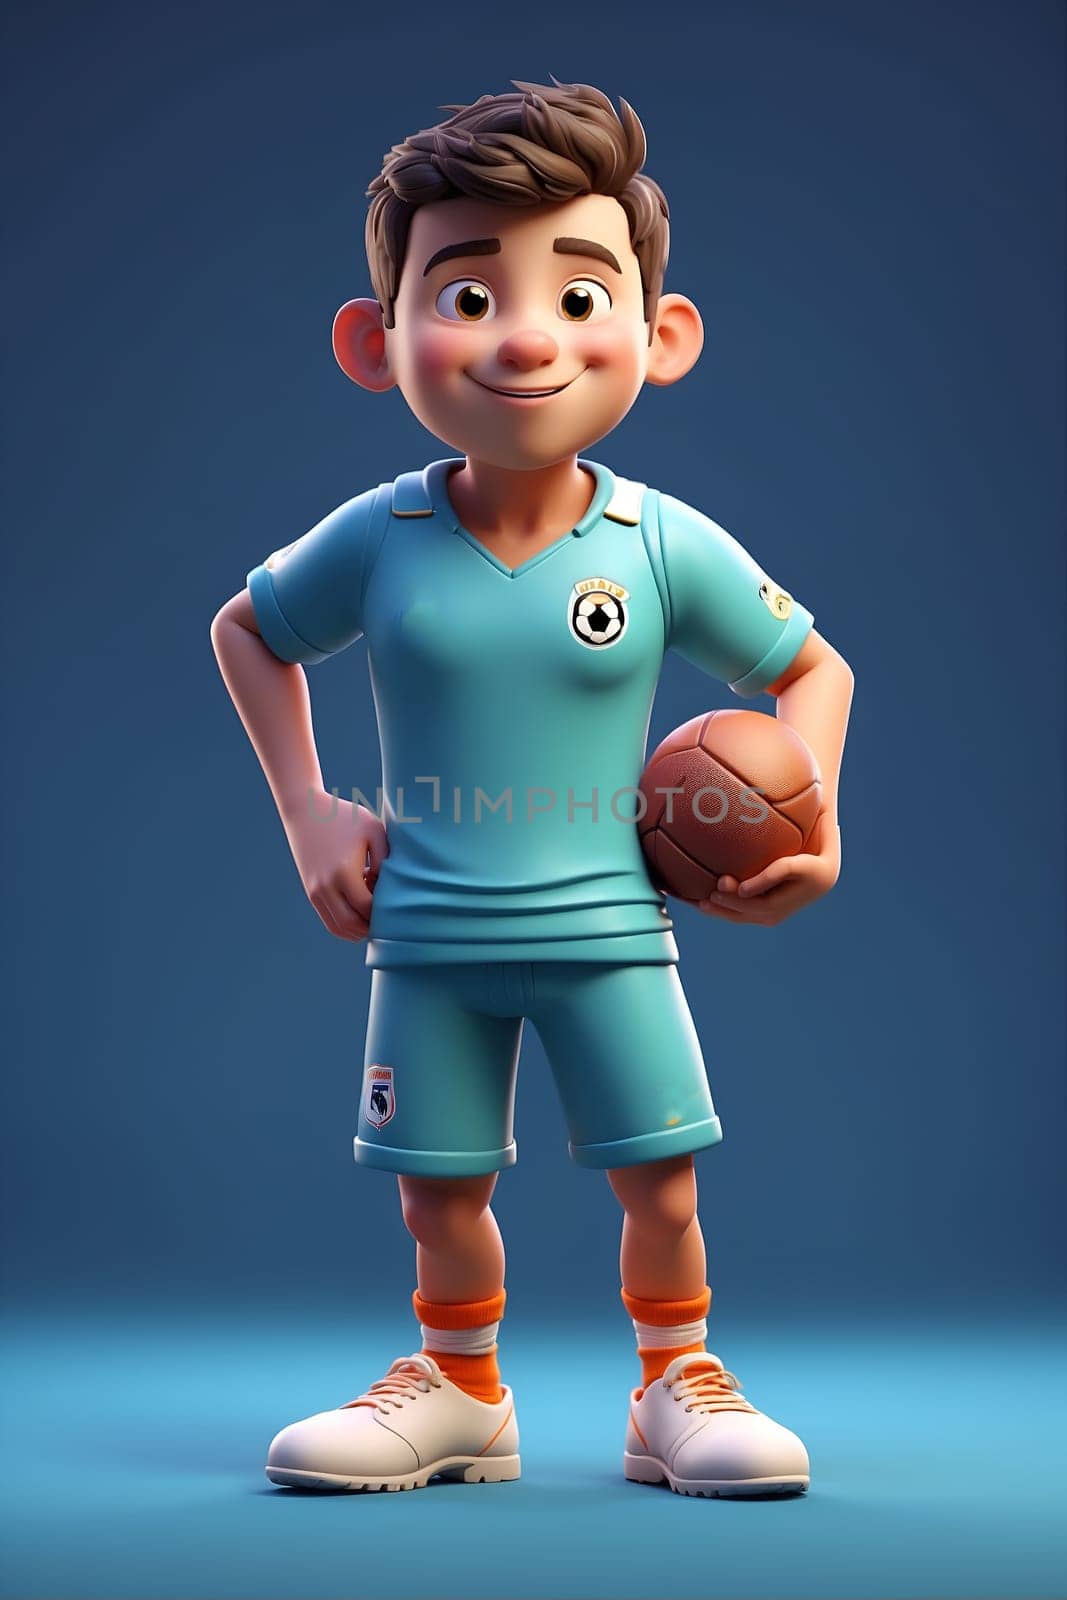 A cartoon boy is seen holding a basketball in his hand.